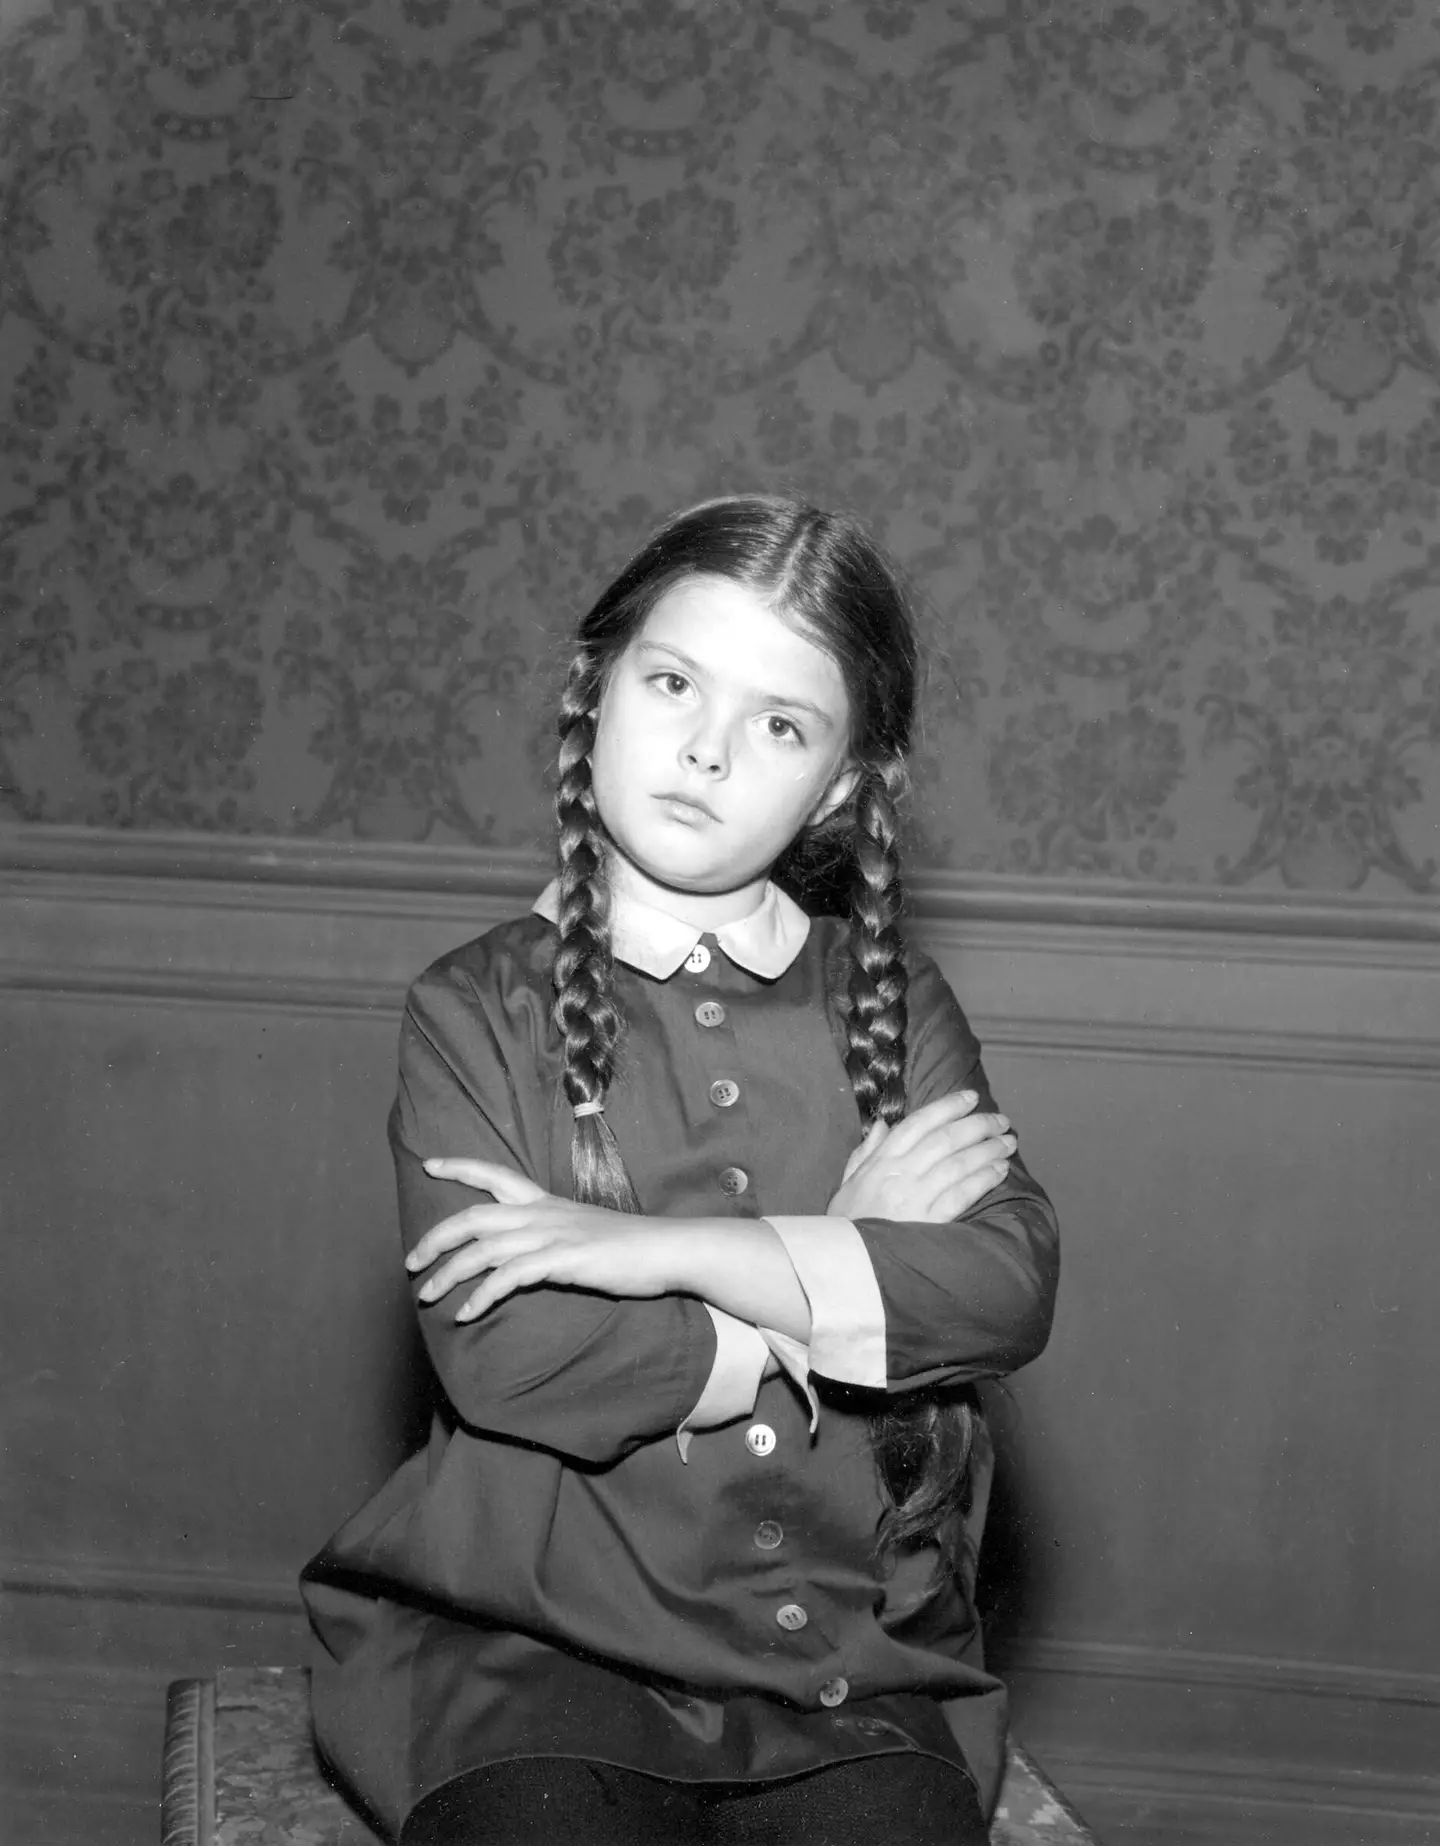 Lisa Loring played Wednesday Addams in the first live action adaptation of The Addams Family.